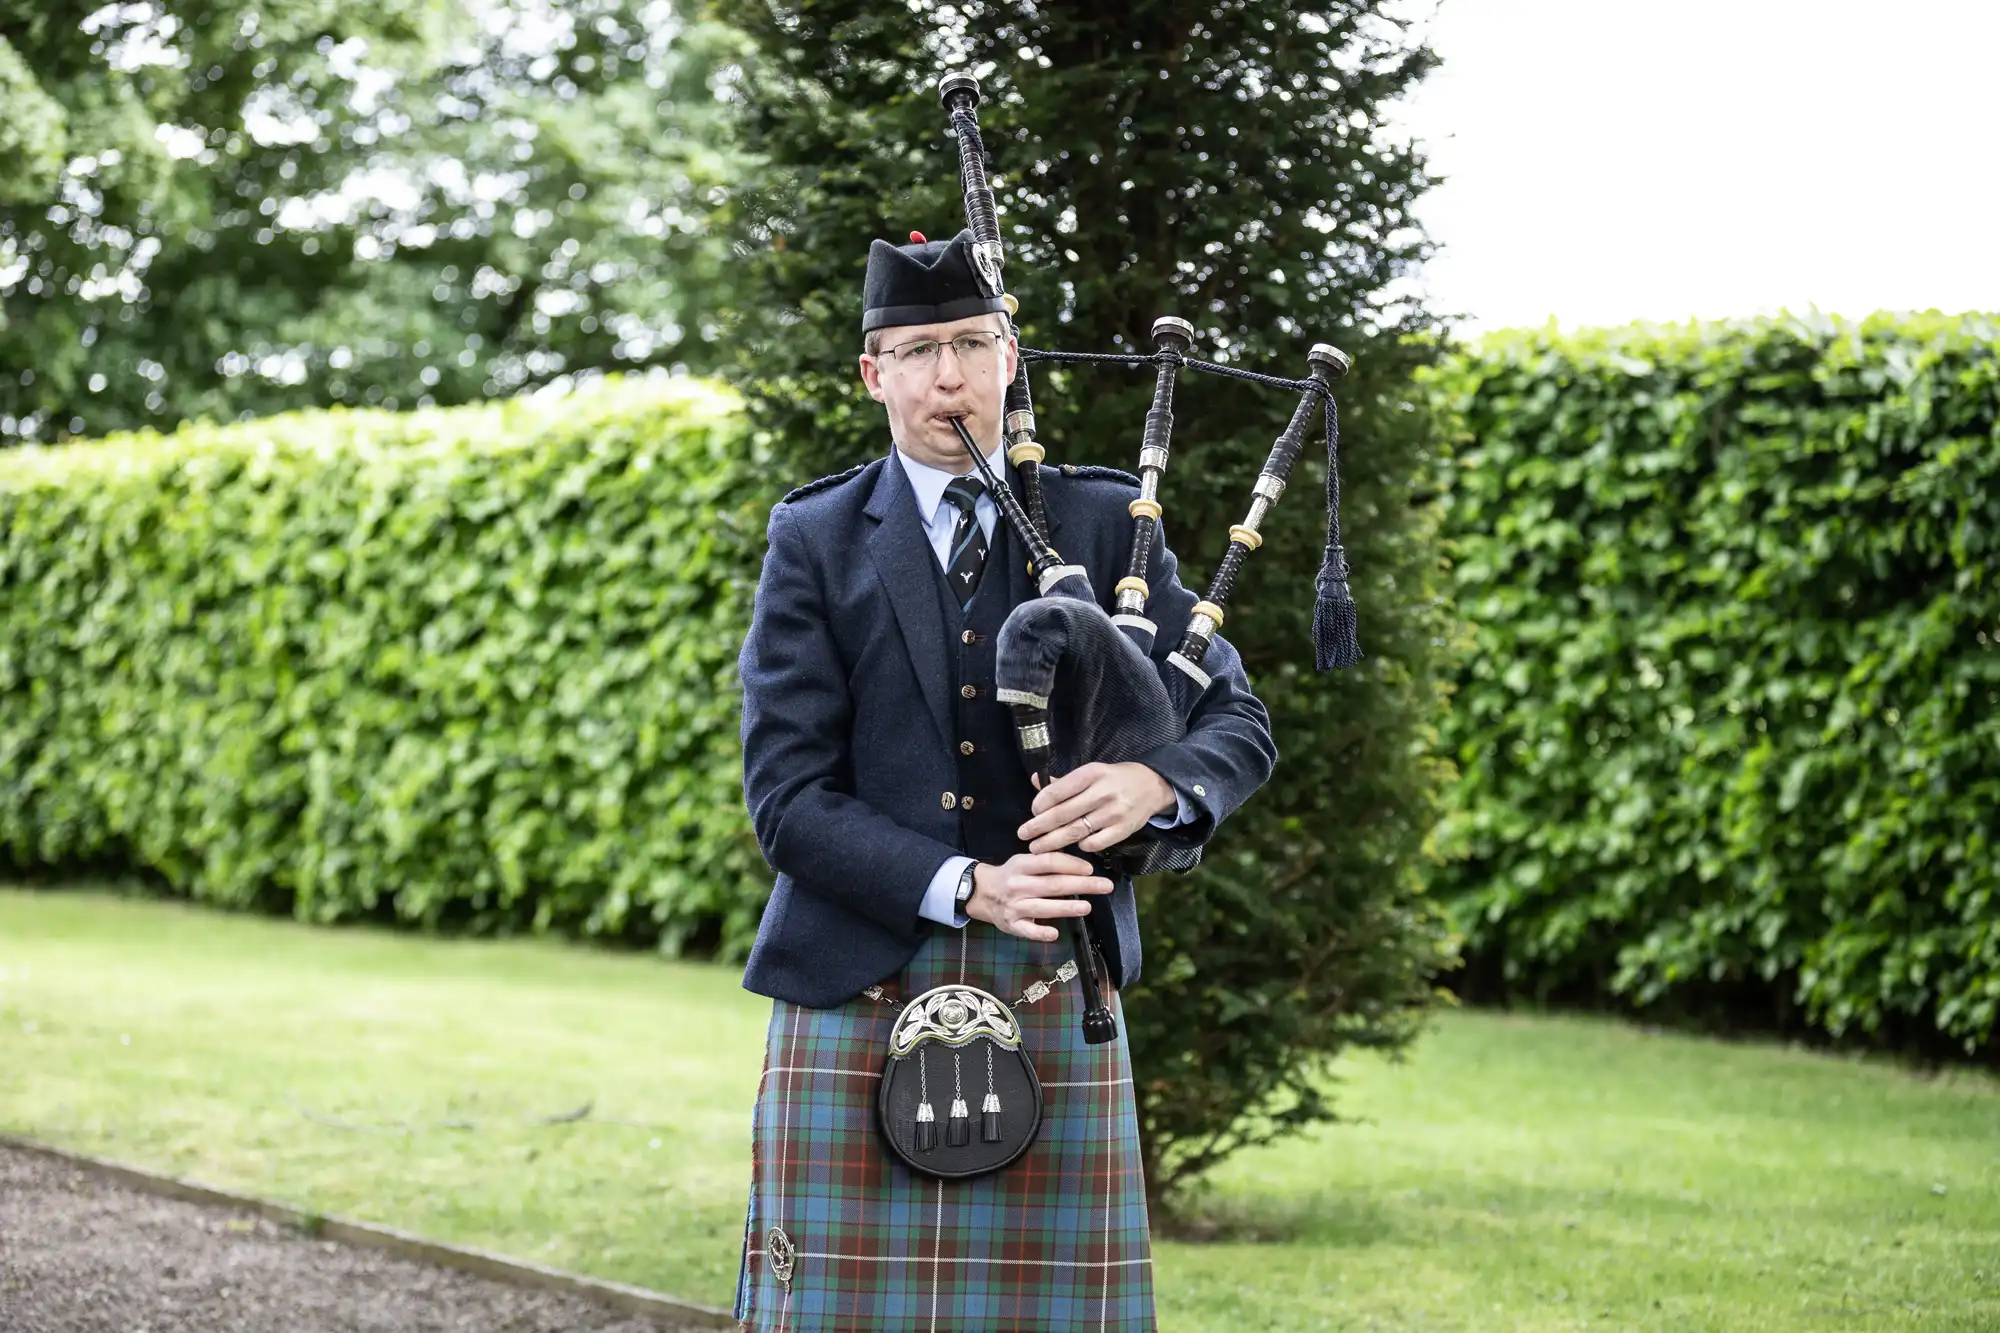 A man in traditional Scottish attire playing the bagpipes outdoors, surrounded by lush greenery.